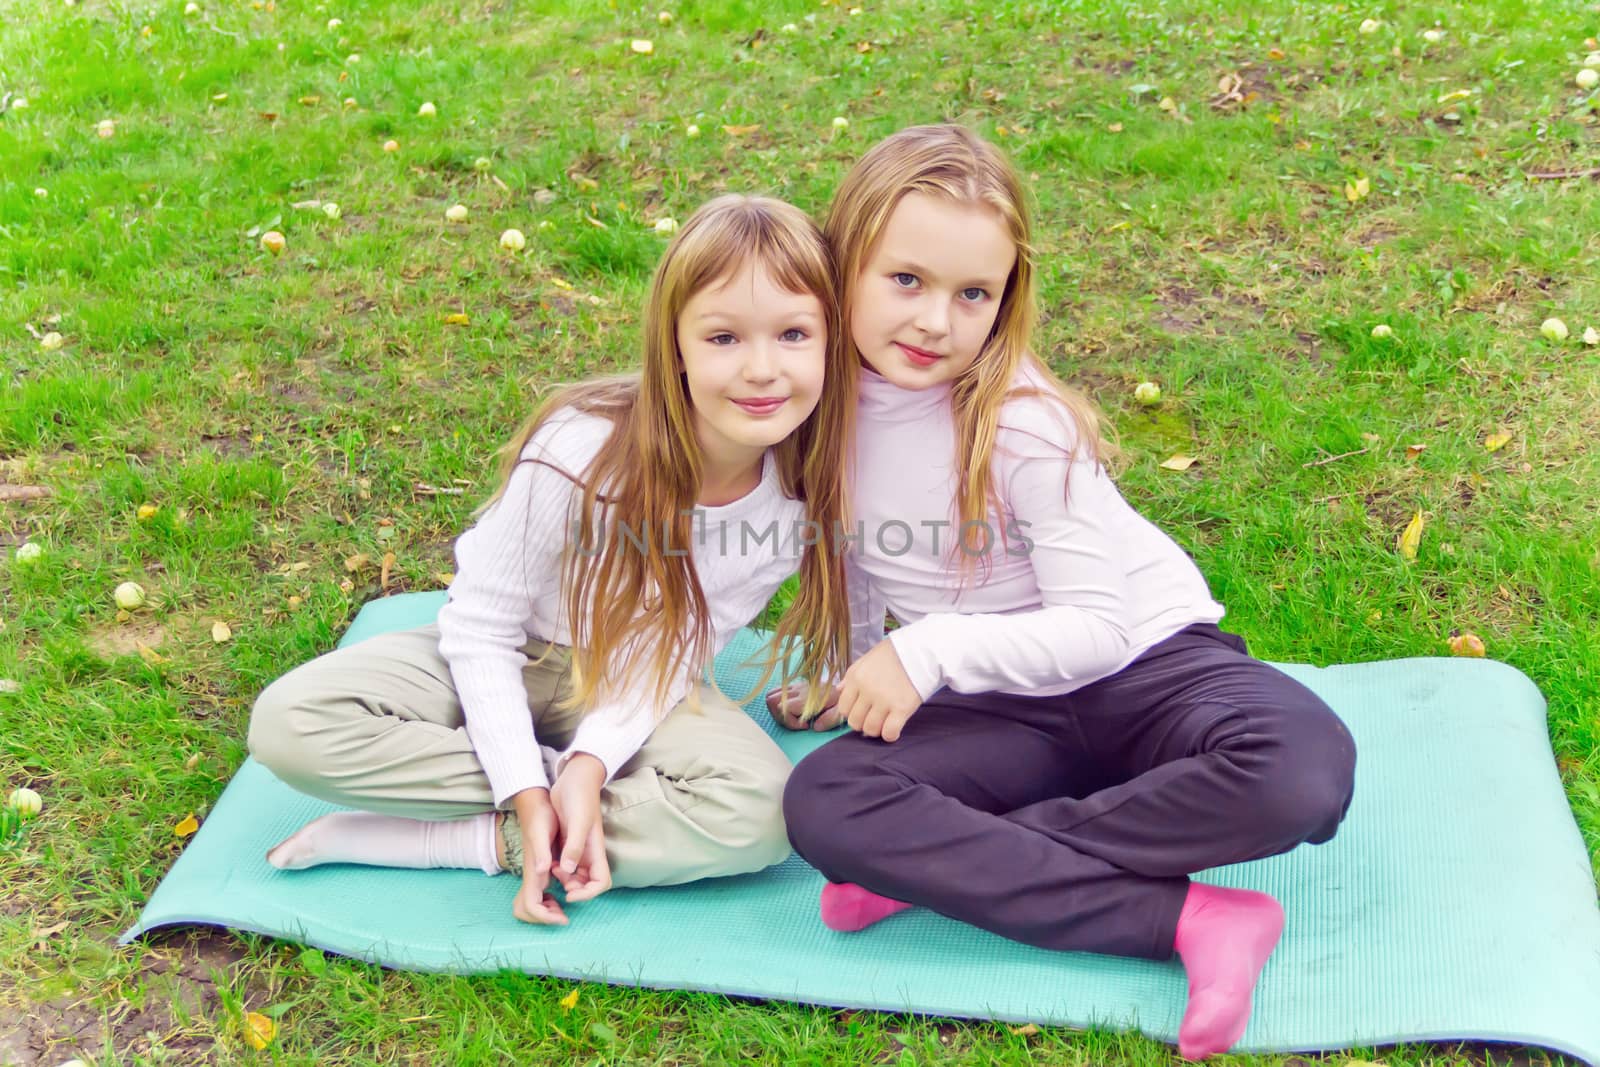 Photo of two girls sitting on grass in summer